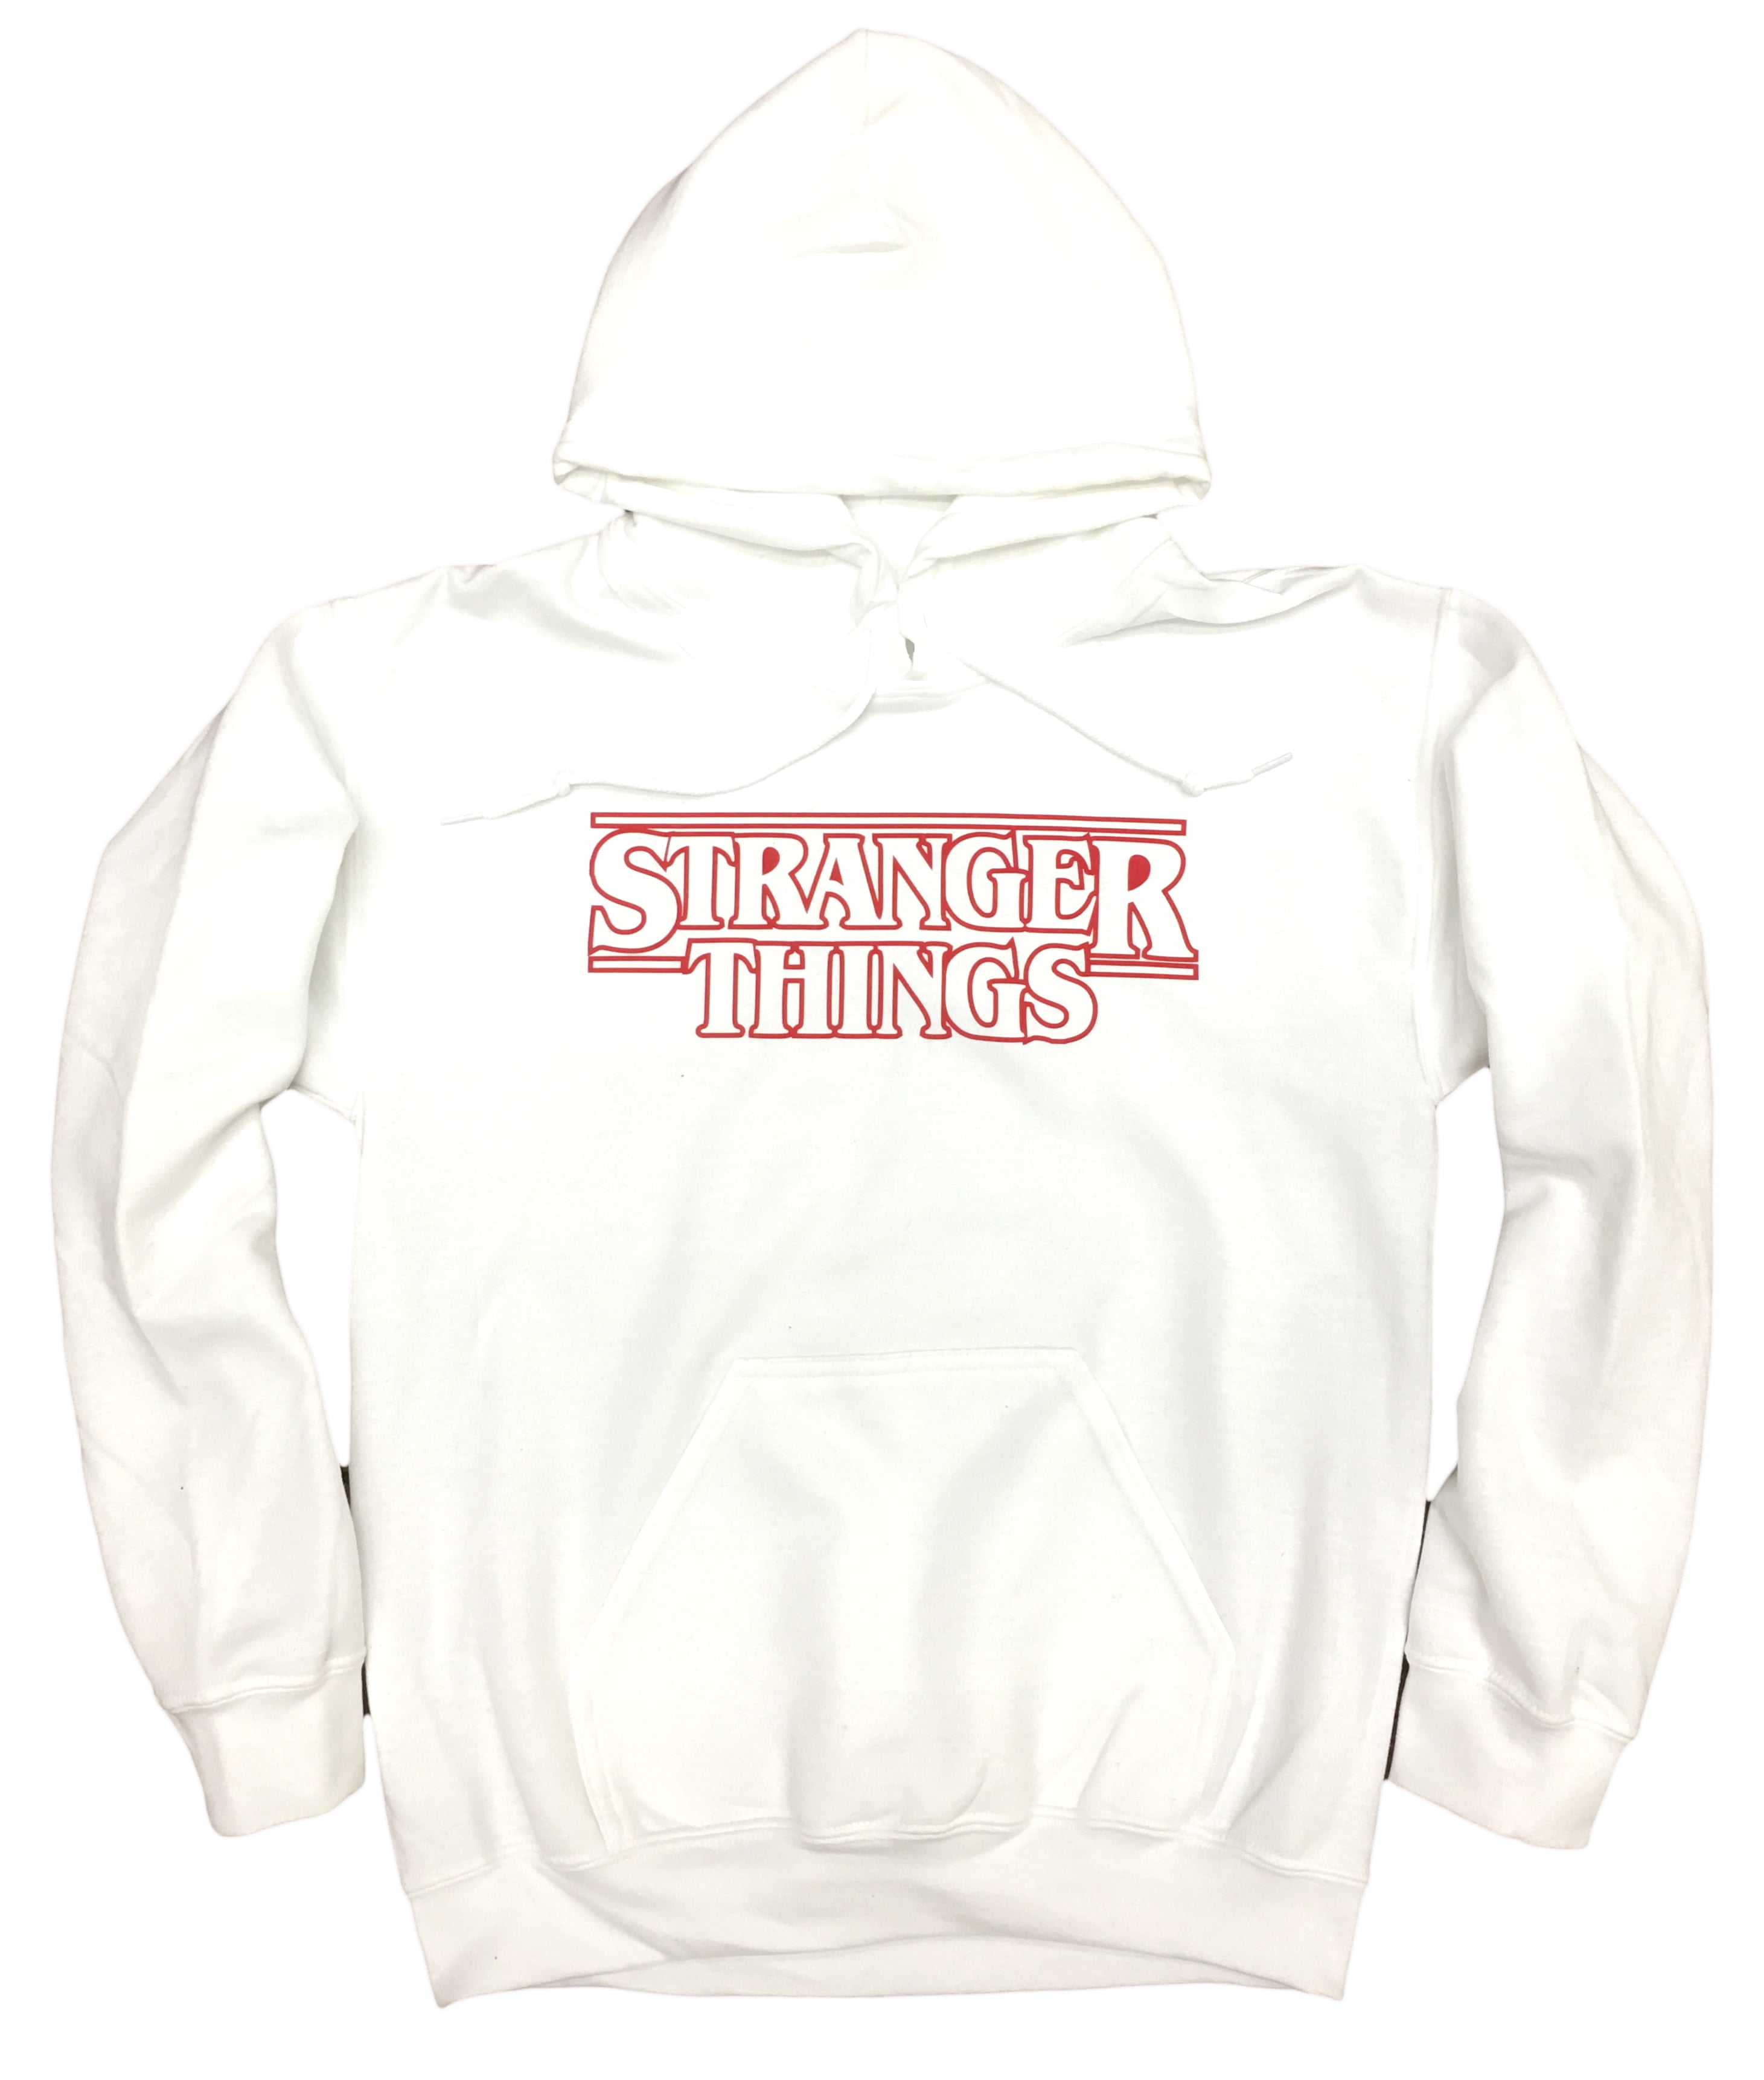 Shop Stranger Things Sweatshirts At Lowest Prices